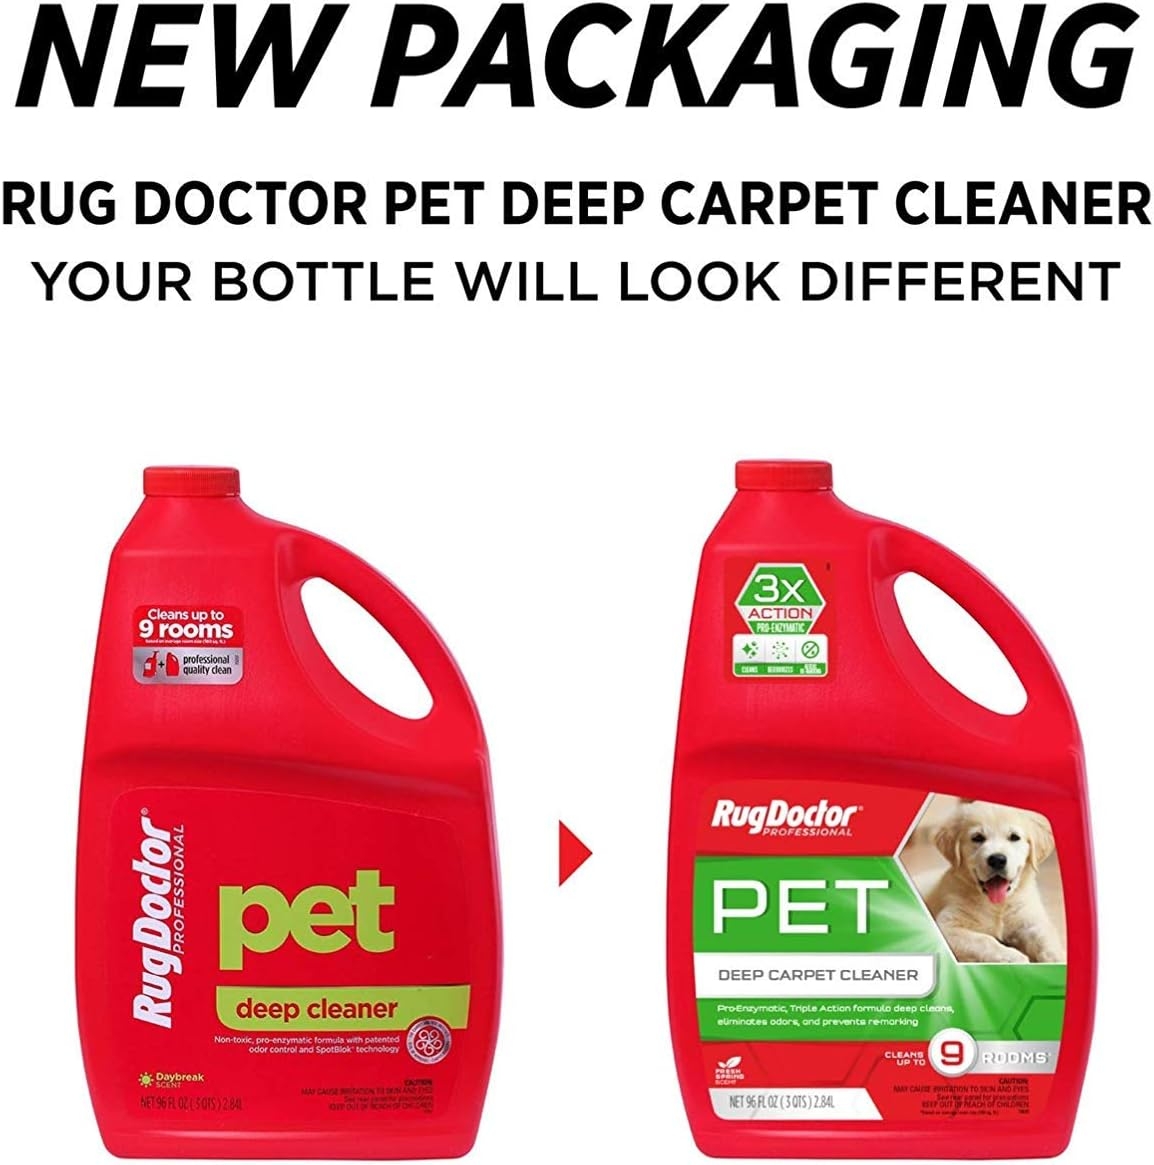 Rug Doctor Triple Action Pet Deep Carpet Cleaner; Permanently Removes Tough Pet Stains and Odors, Professional-Grade, Protects Soft Surfaces from Pet Accidents, CRI-Certified, 96 Oz. (Fоur Расk)